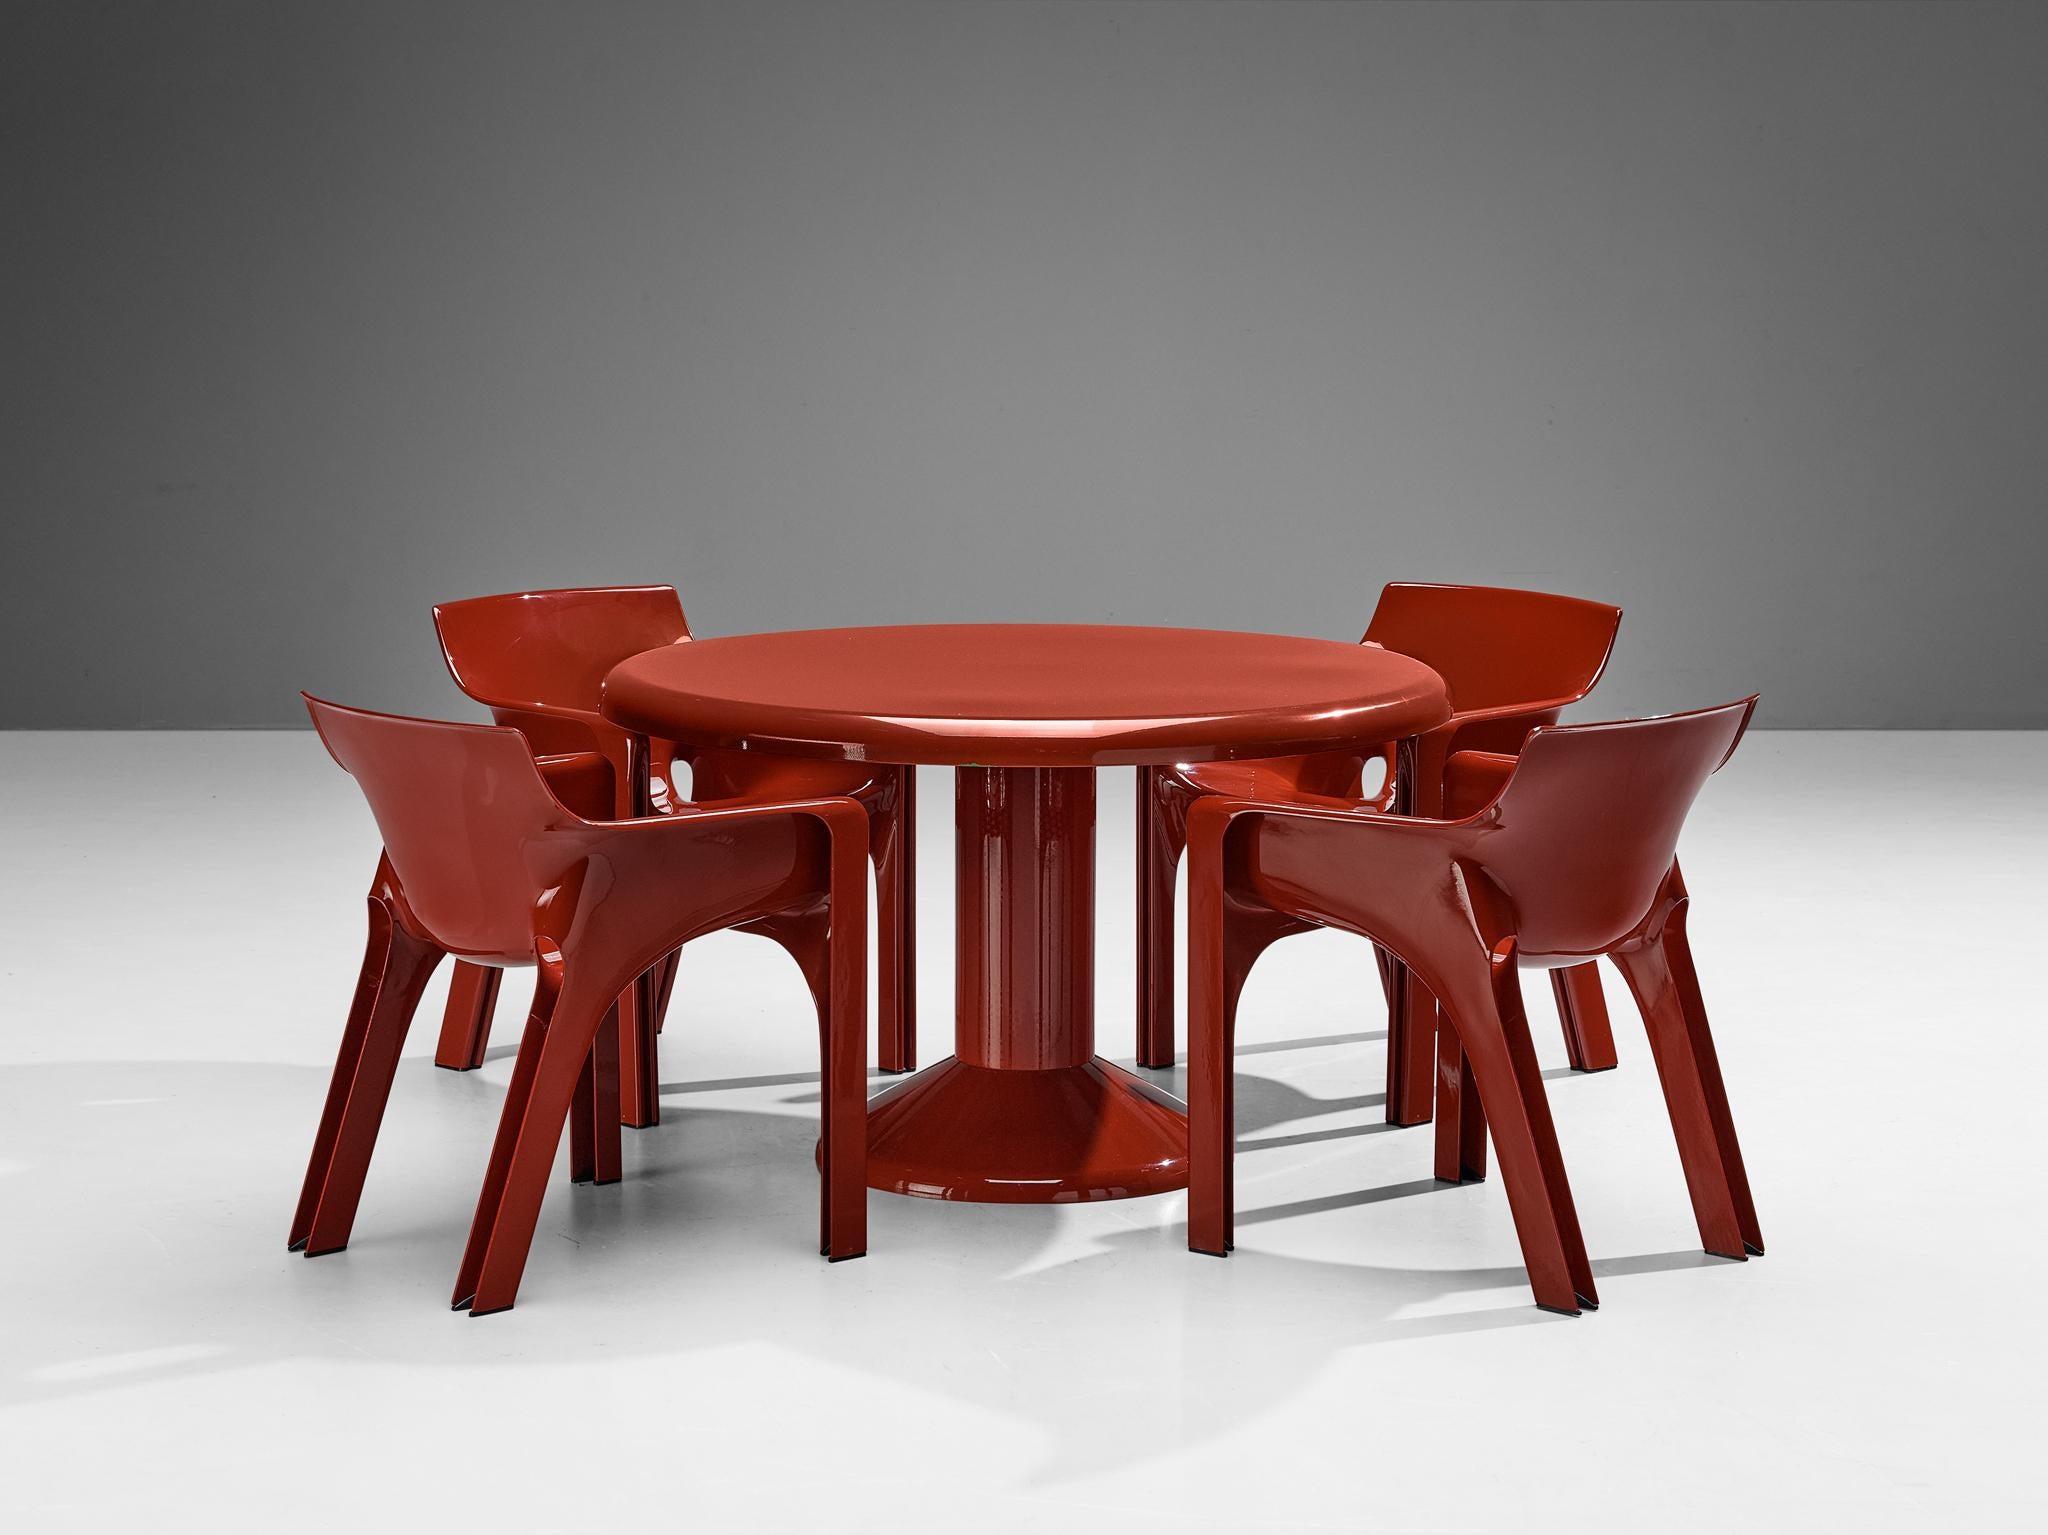 A lovely dining set consisting furniture designed by Vico Magistretti .

Vico Magistretti for Artemide, four 'Gaudi' chairs, fiberglass, Italy, 1971

These sculptural, simplistic chairs feature large, straight legs that are tilted. The seat and